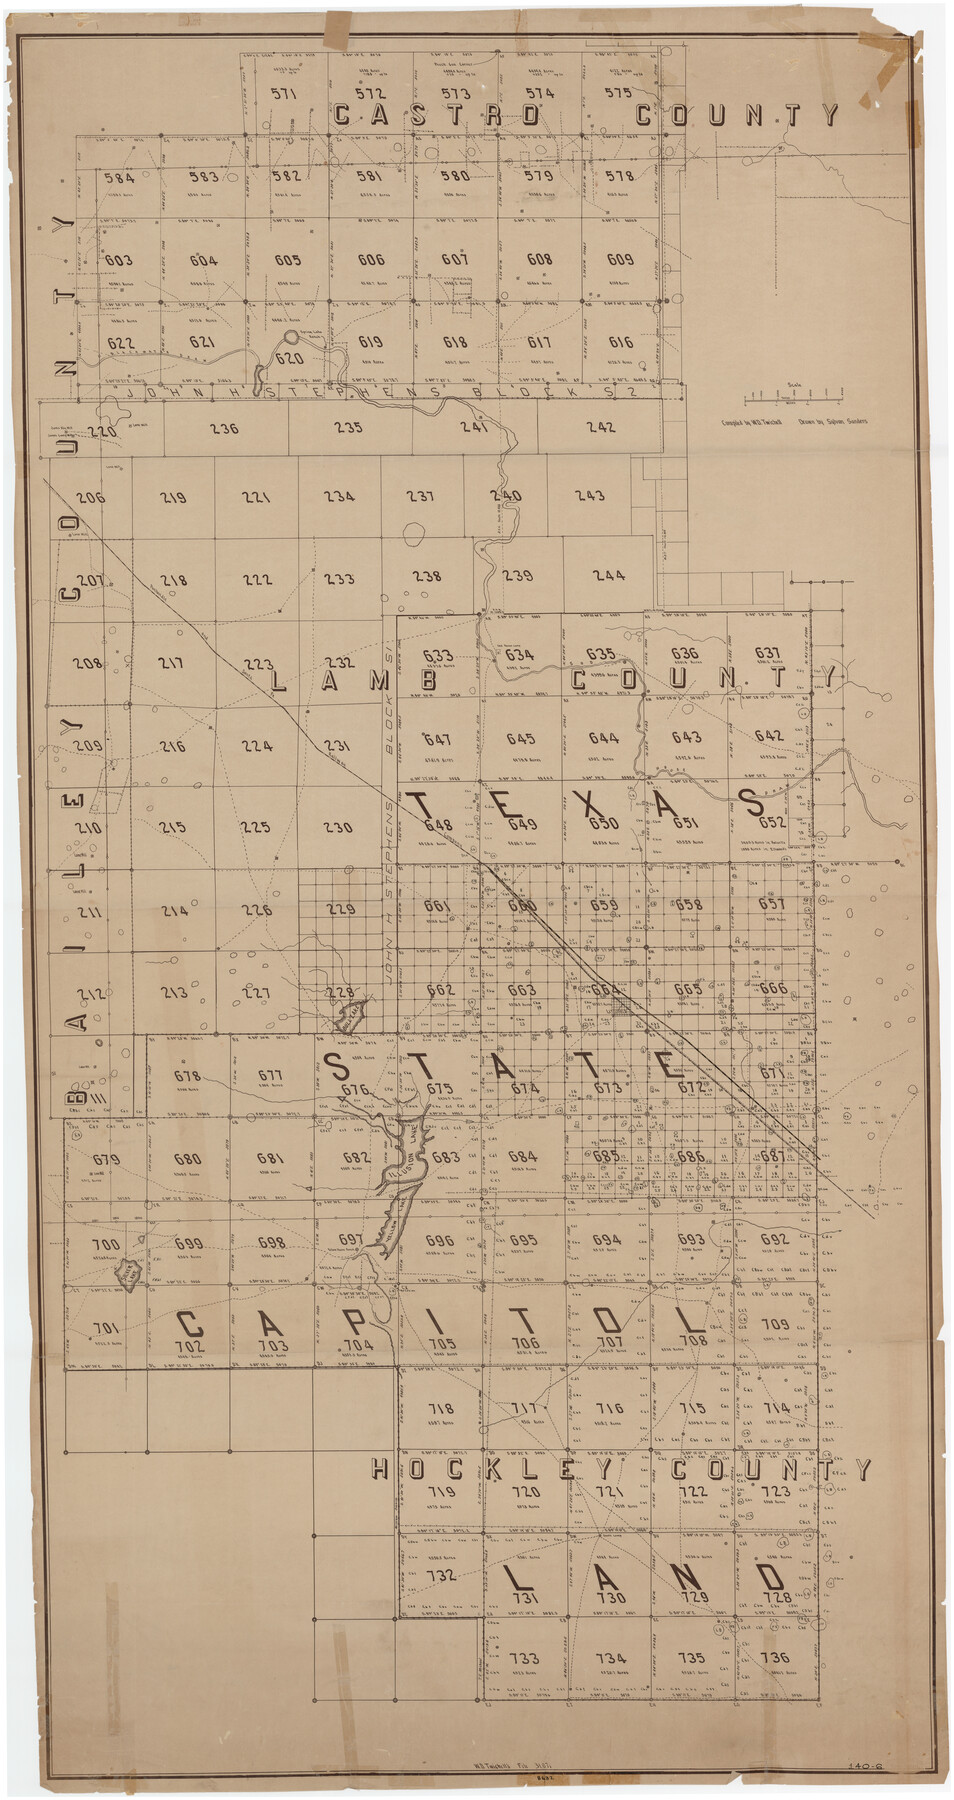 89725, [Sketch showing Capitol Lands], Twichell Survey Records